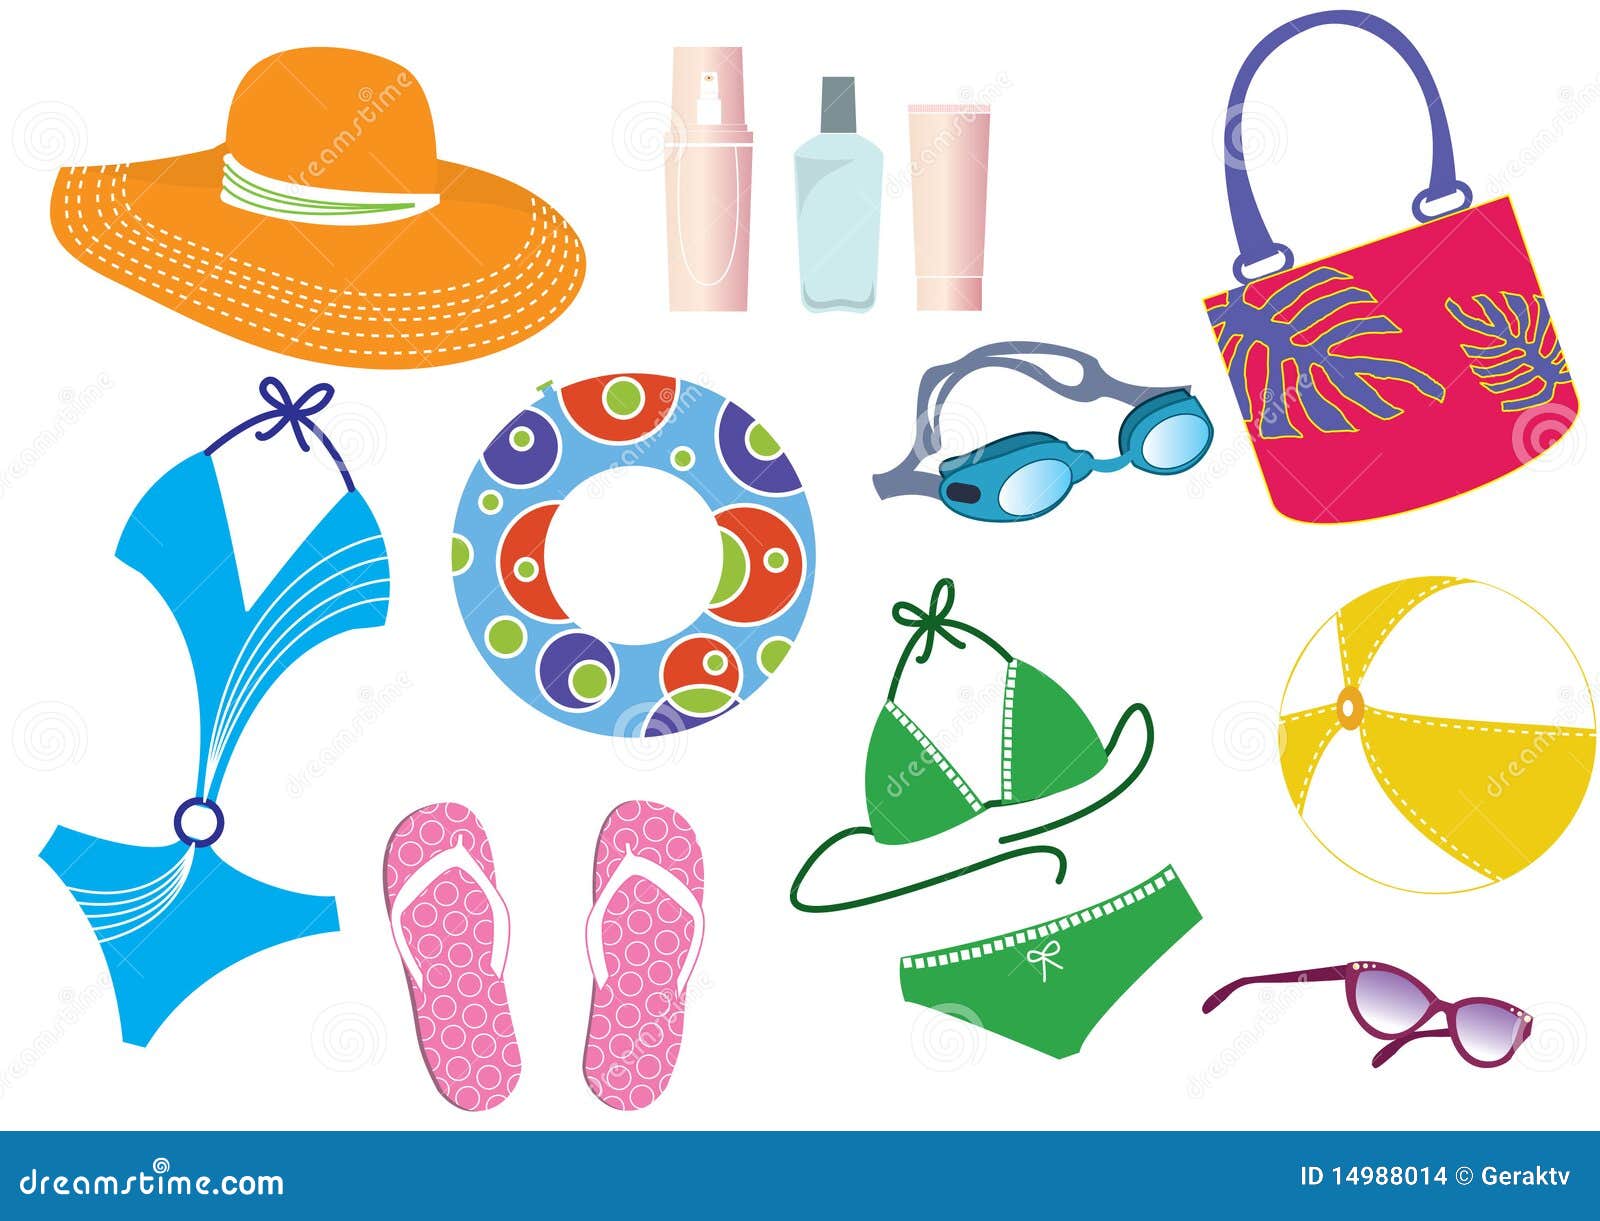 summer things clipart - photo #30